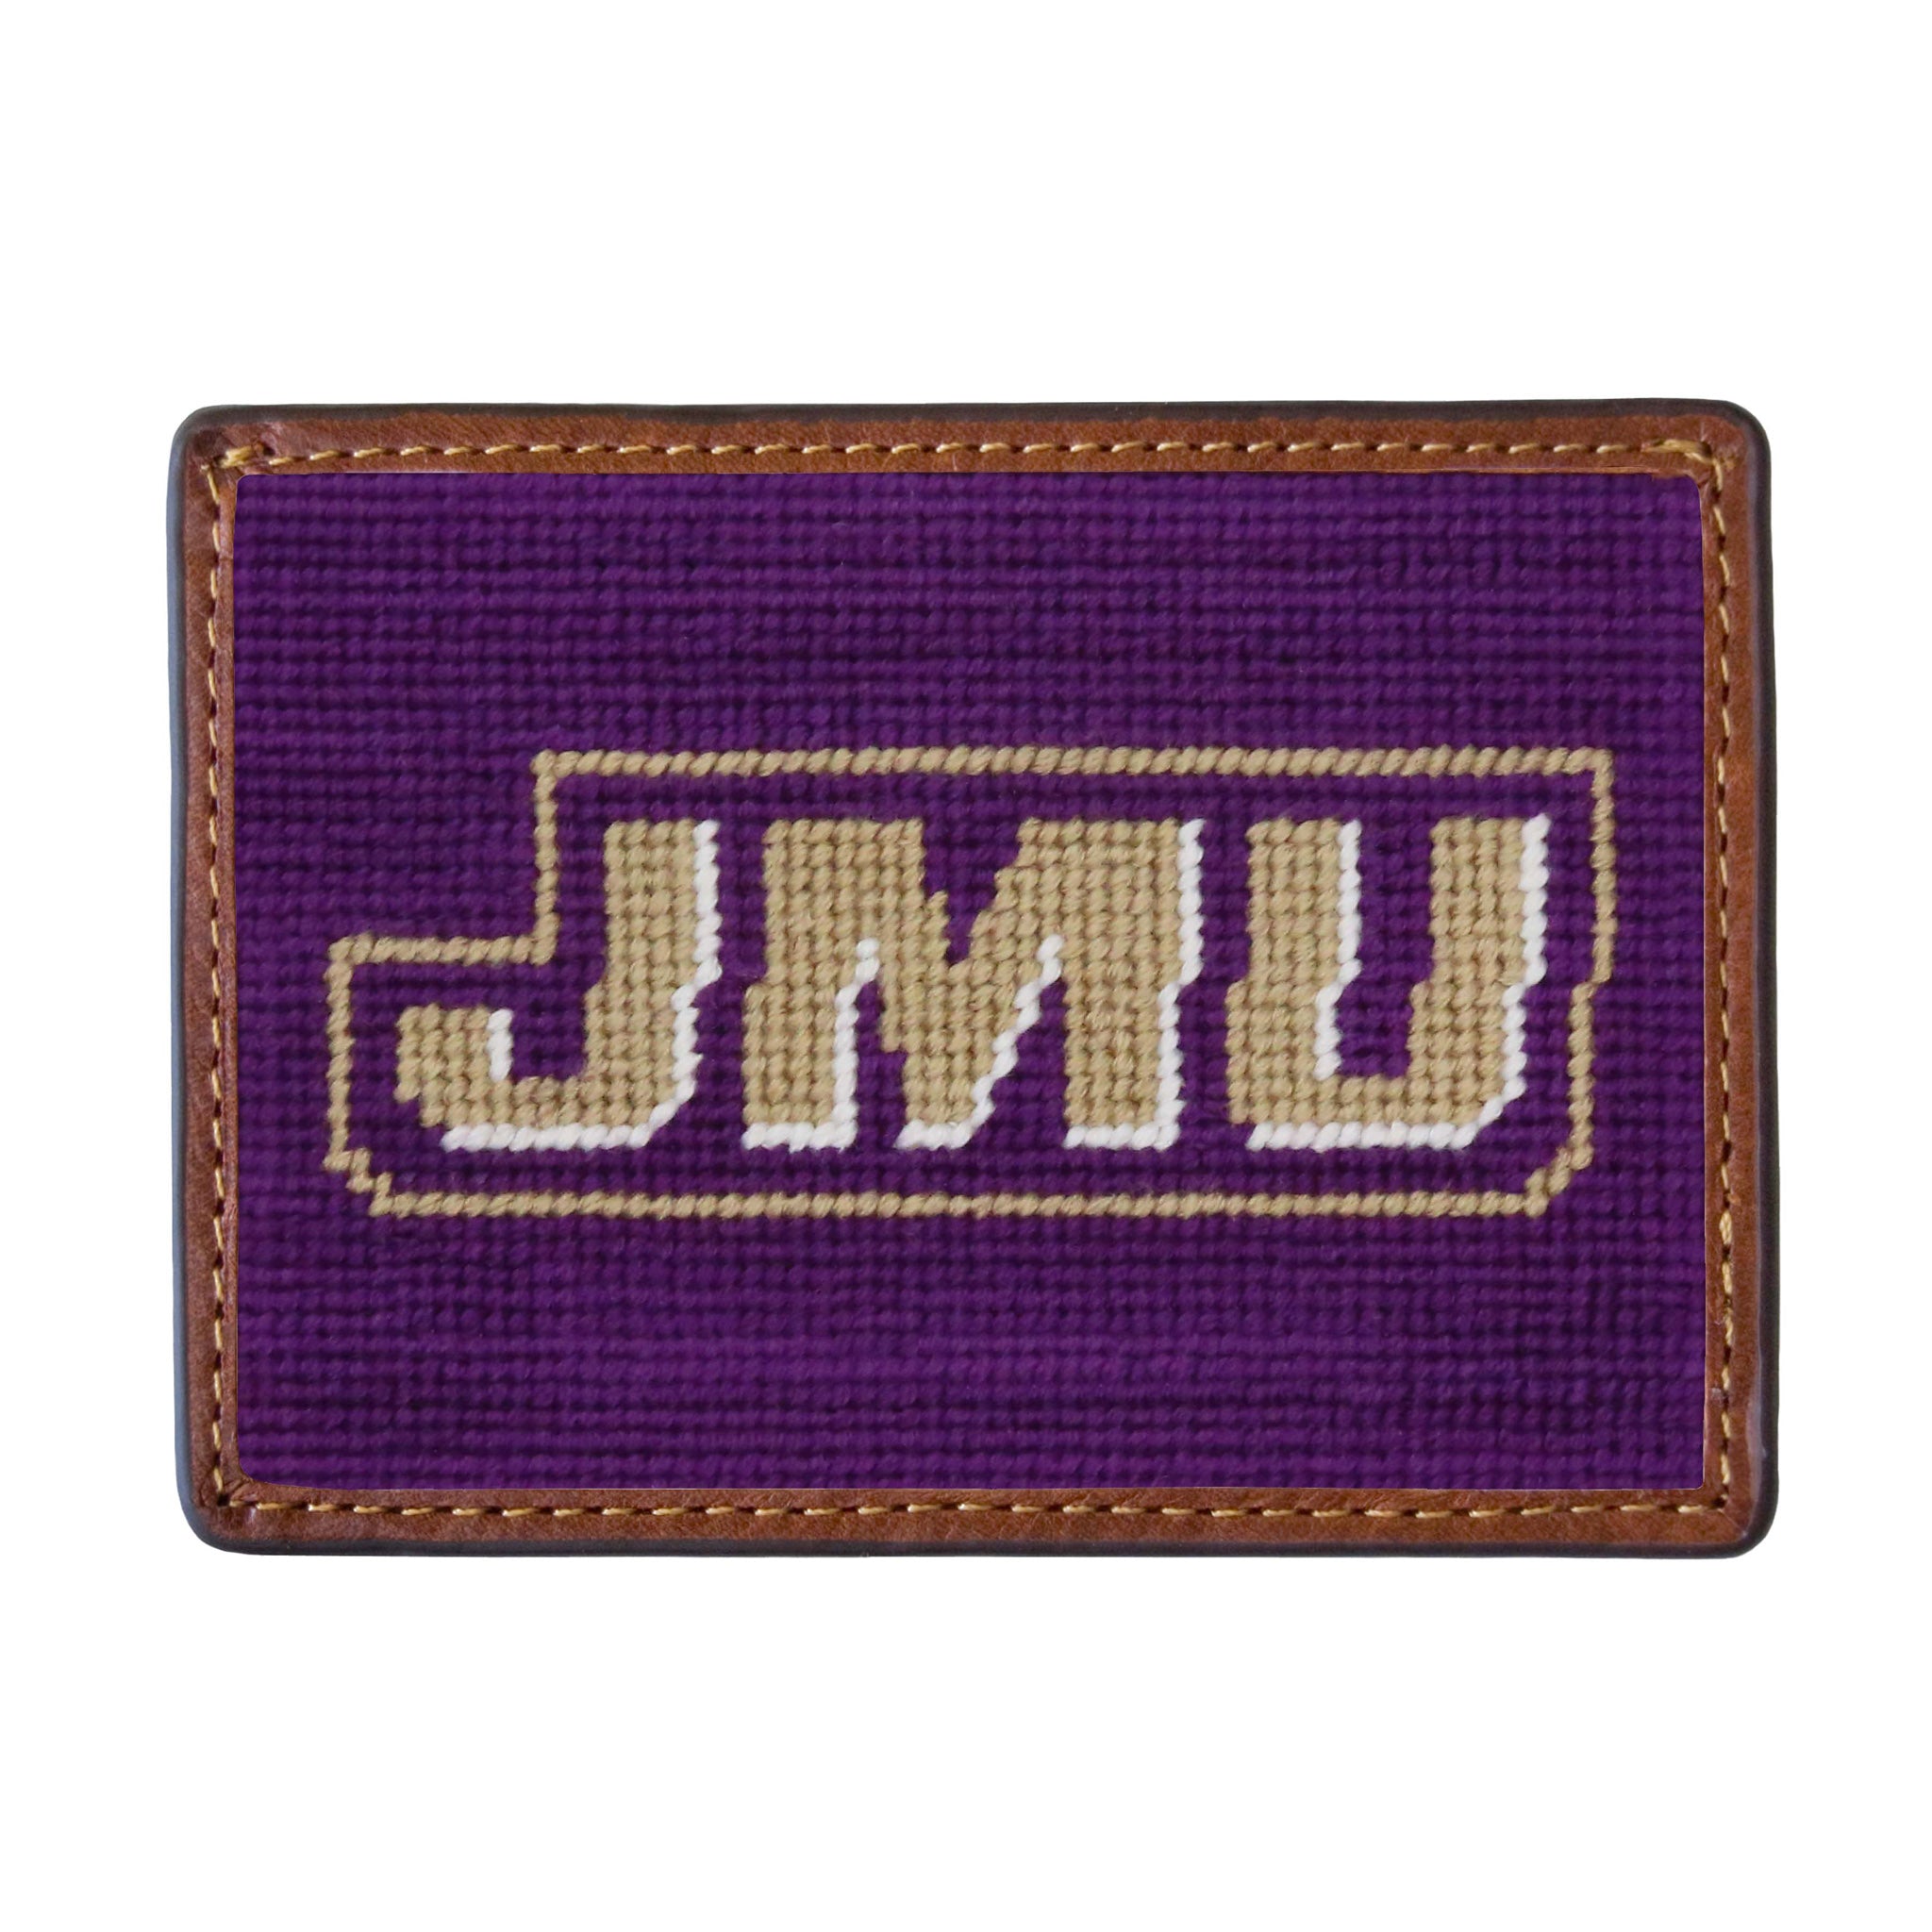 Smathers and Branson James Madison Royal Purple Needlepoint Credit Card Wallet 